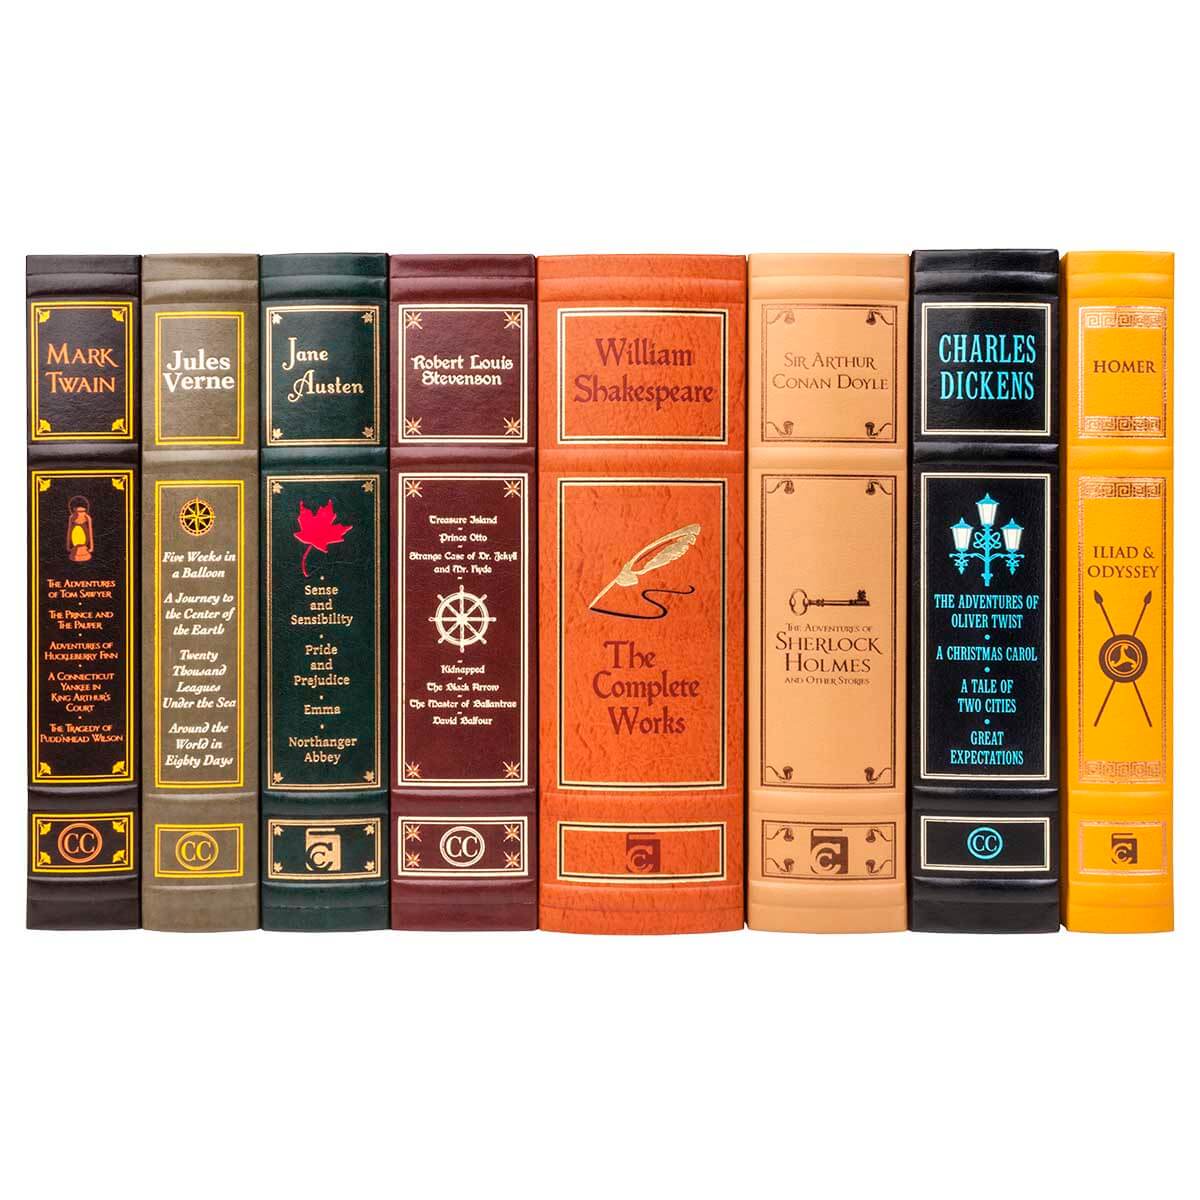 Canterbury Classics Leather-Bound Series in Sets of 10